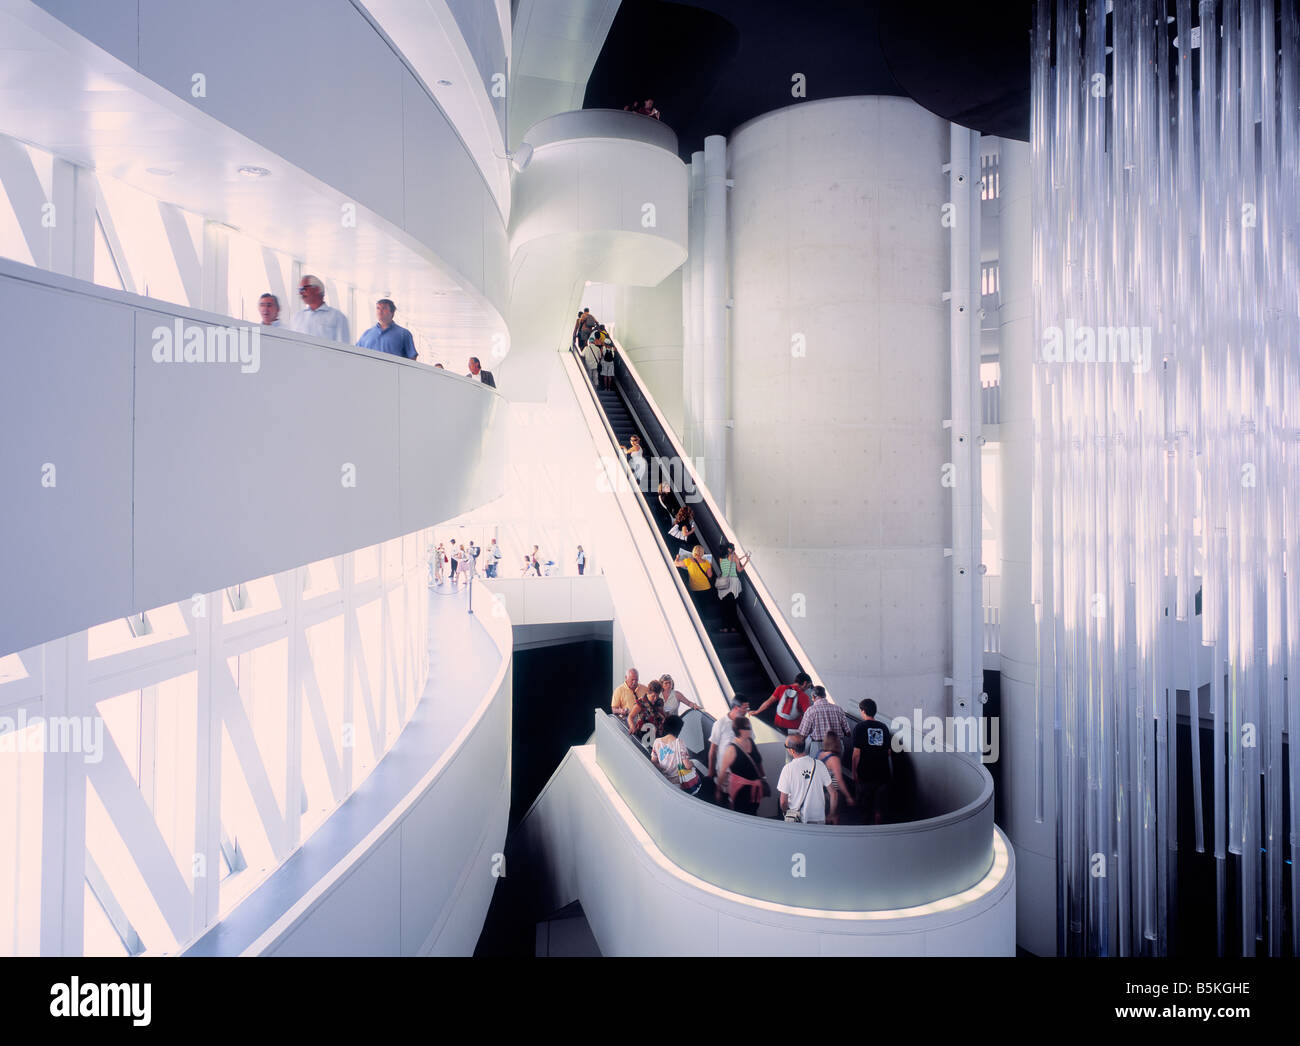 People inside the Water Tower (Torre del Agua) designed by Enrique de Teresa at the Water Expo Zaragoza, Spain. Stock Photo